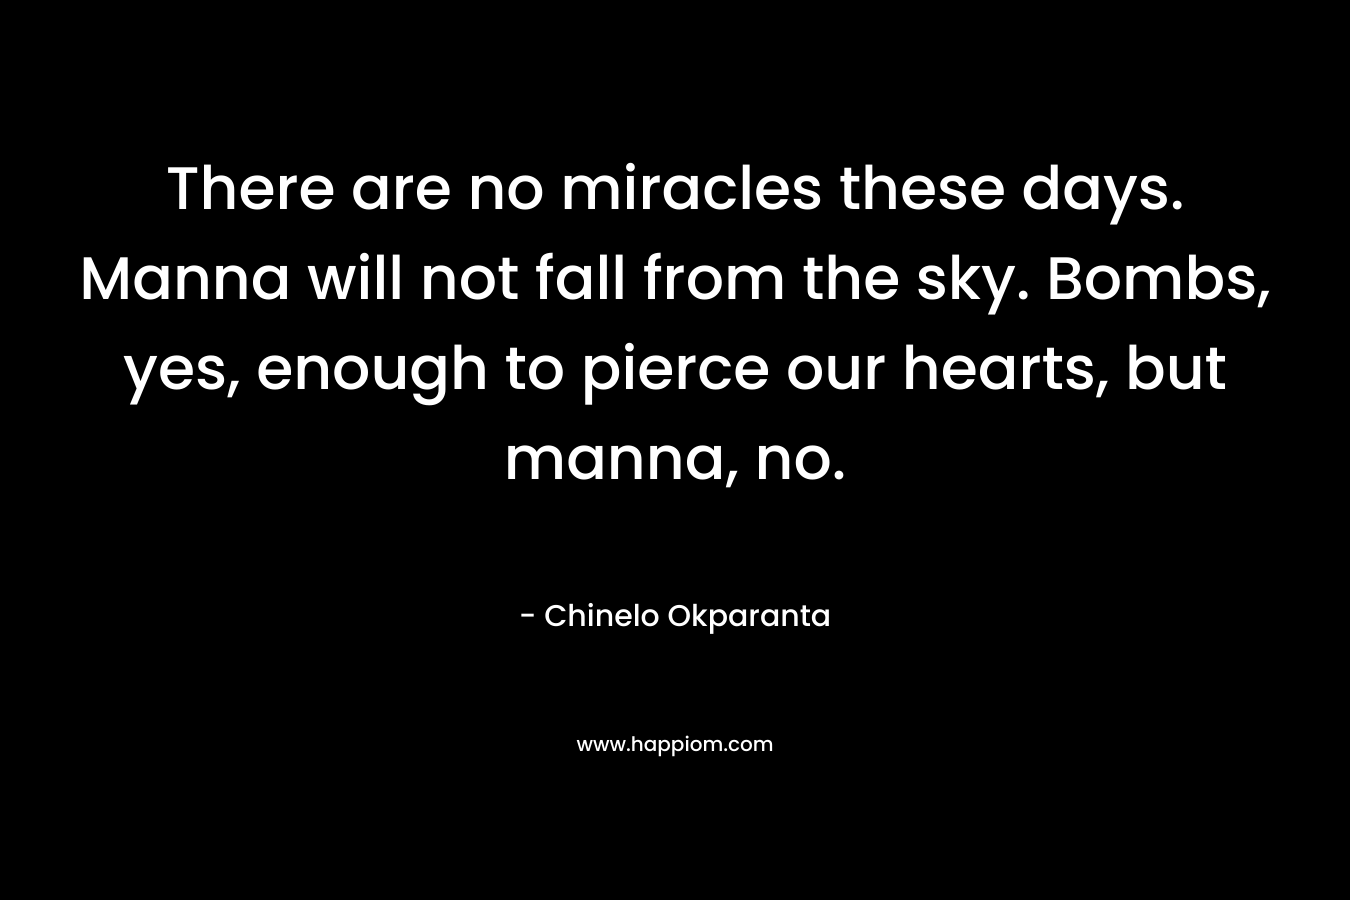 There are no miracles these days. Manna will not fall from the sky. Bombs, yes, enough to pierce our hearts, but manna, no. – Chinelo Okparanta